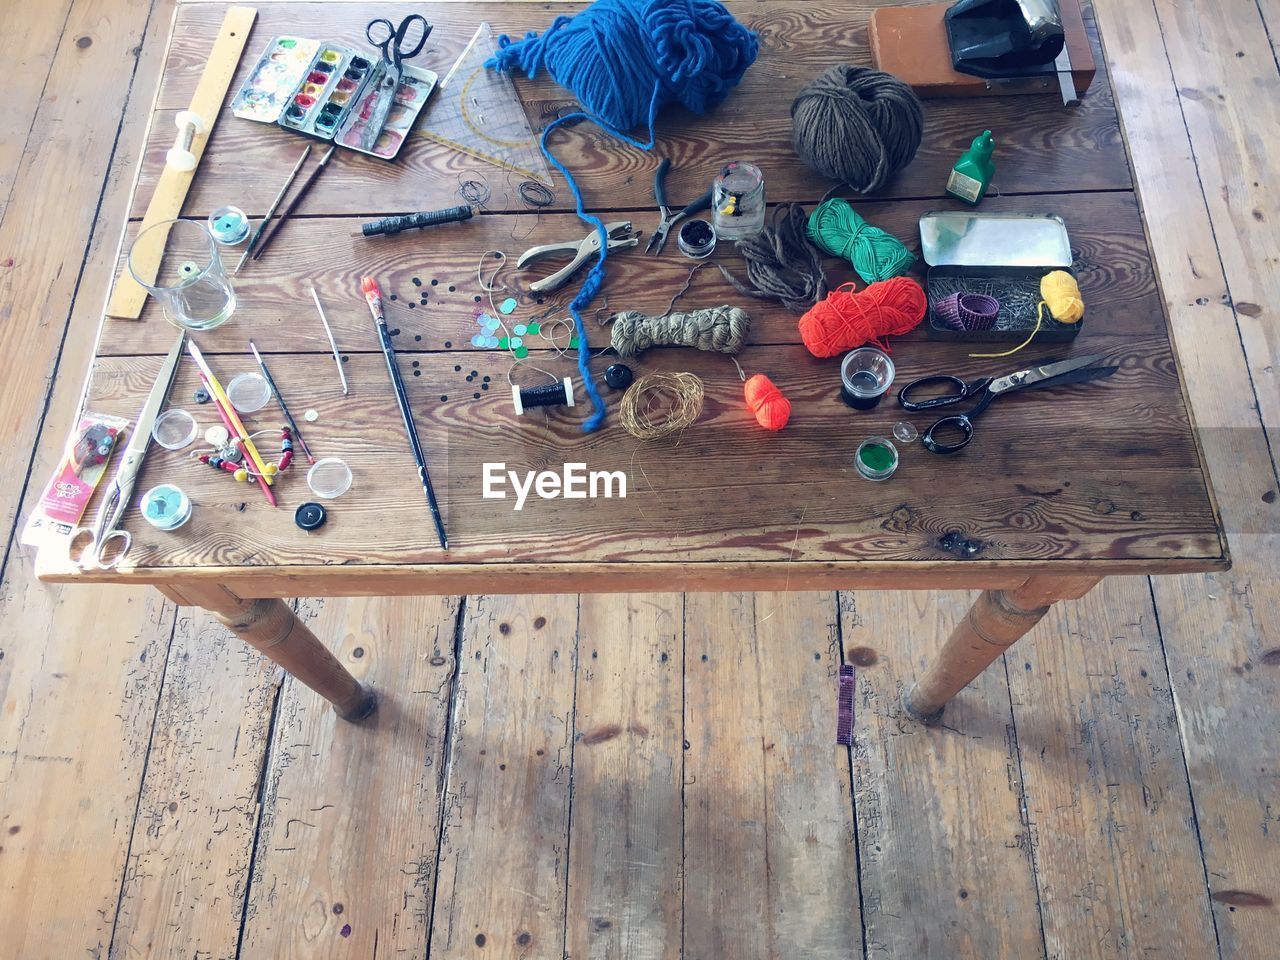 High angle view of sewing items on wooden table